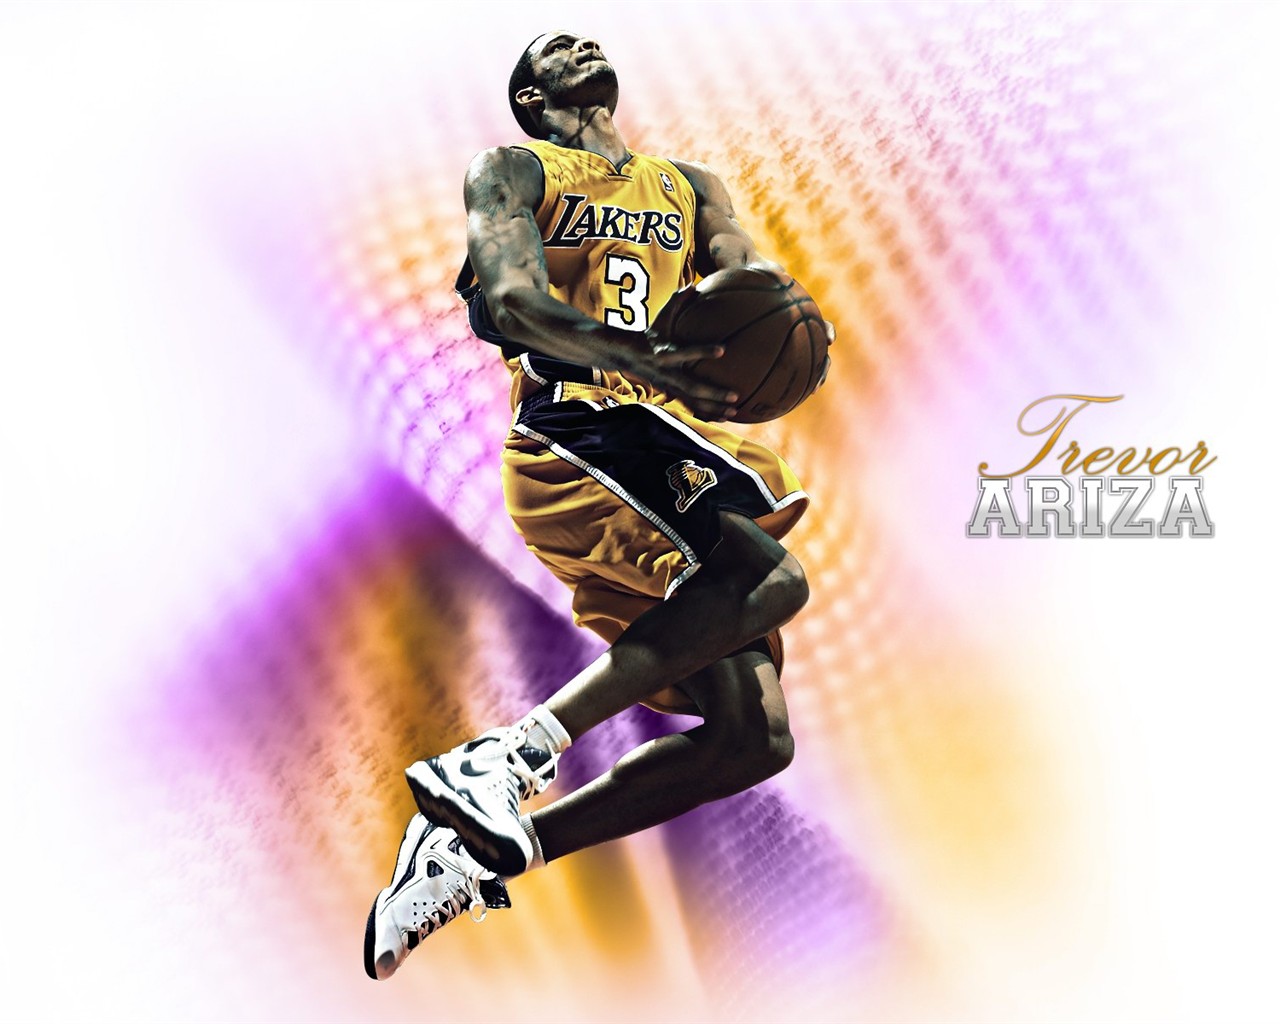 Los Angeles Lakers Official Wallpaper #27 - 1280x1024